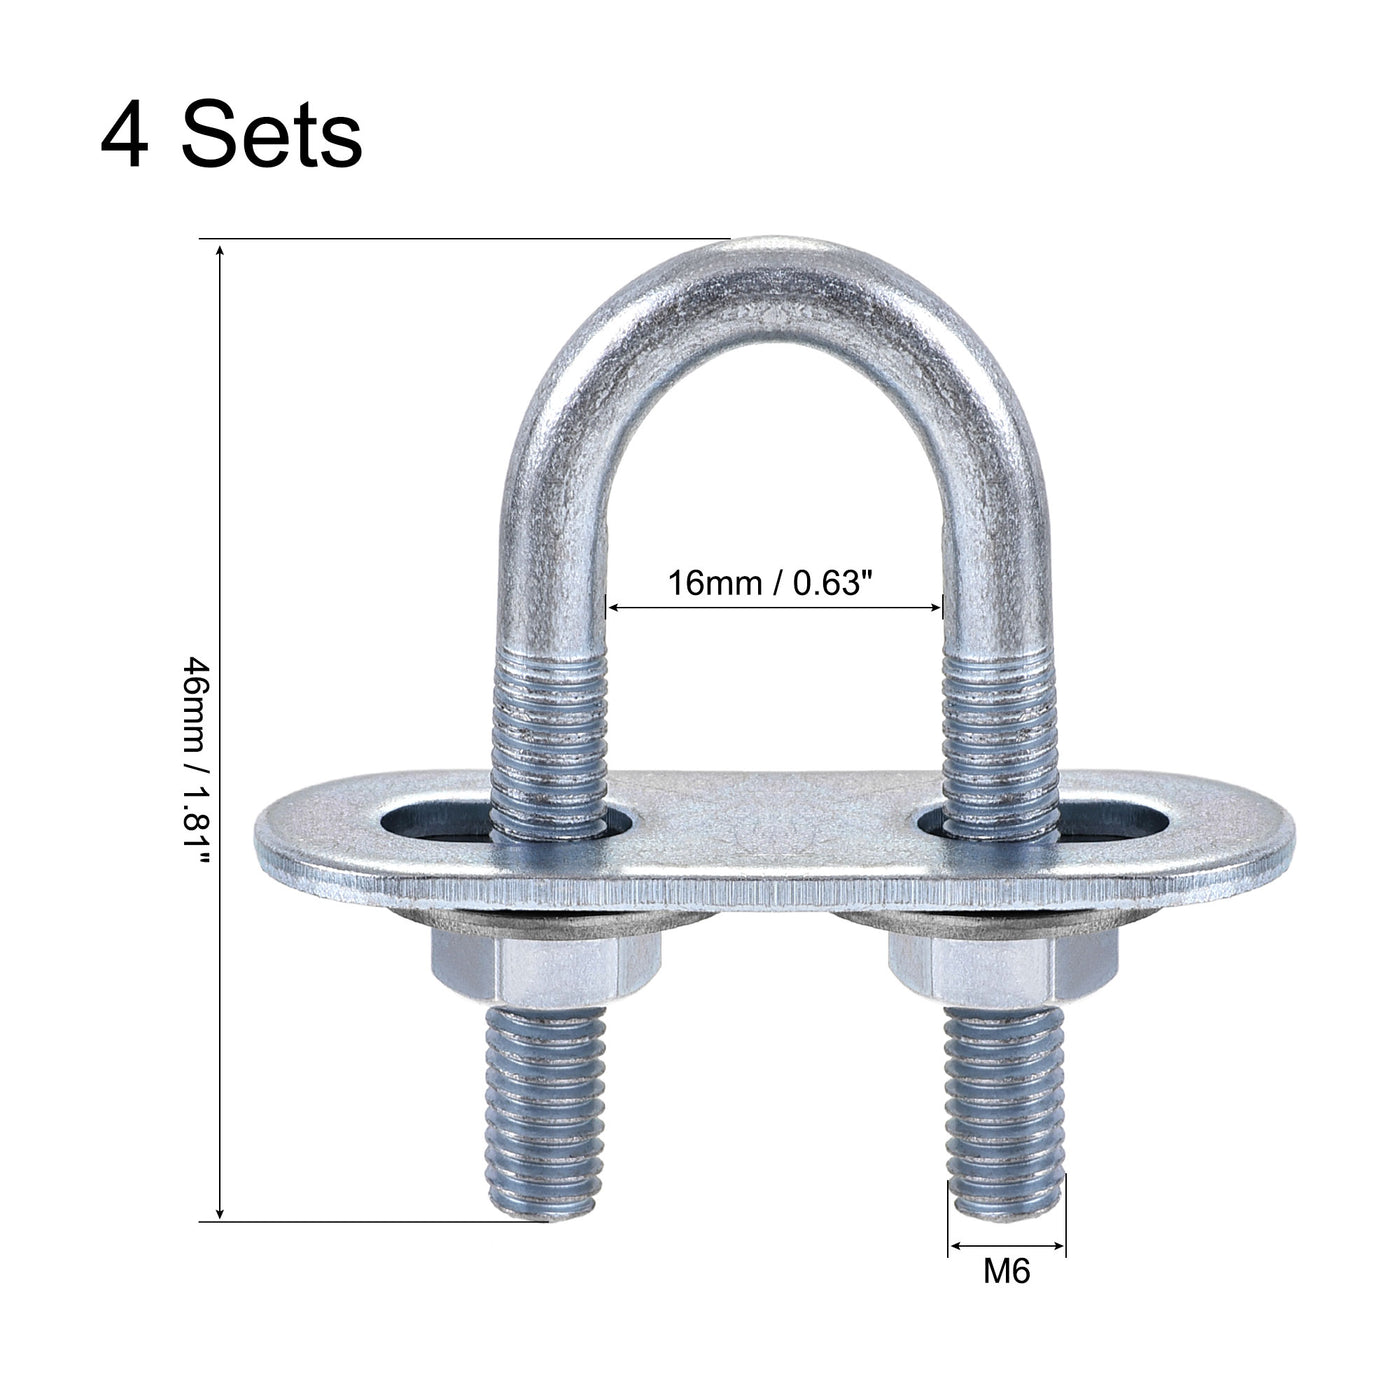 Uxcell Uxcell Round U-Bolt 60mm Inner Width 110mm Length Steel M6 with Nut Plate Washer 4 Sets